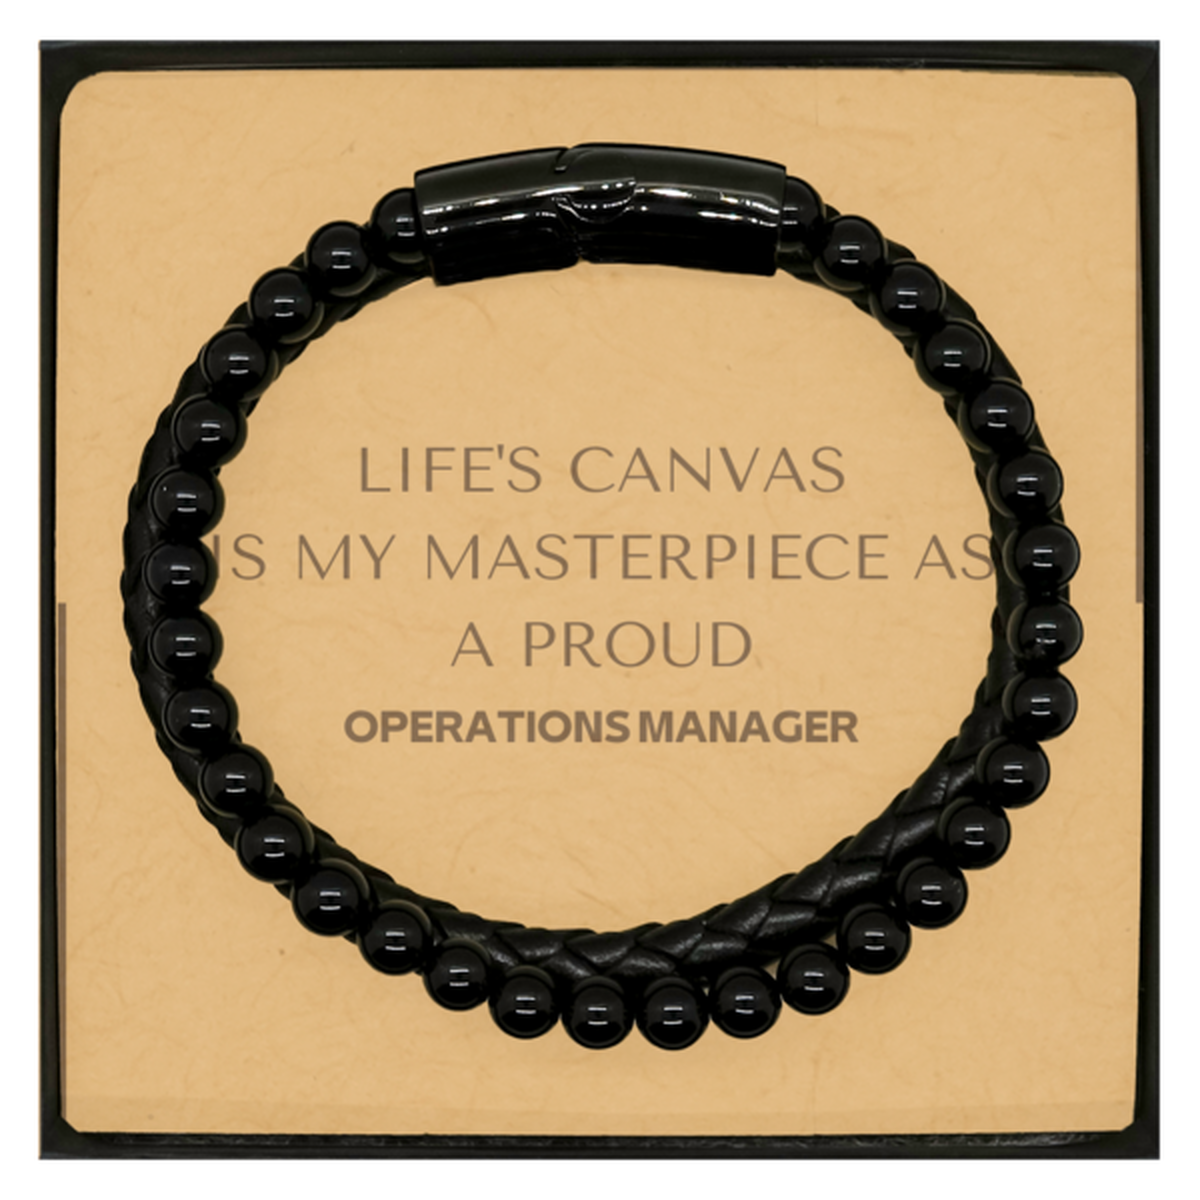 Proud Operations Manager Gifts, Life's canvas is my masterpiece, Epic Birthday Christmas Unique Stone Leather Bracelets For Operations Manager, Coworkers, Men, Women, Friends